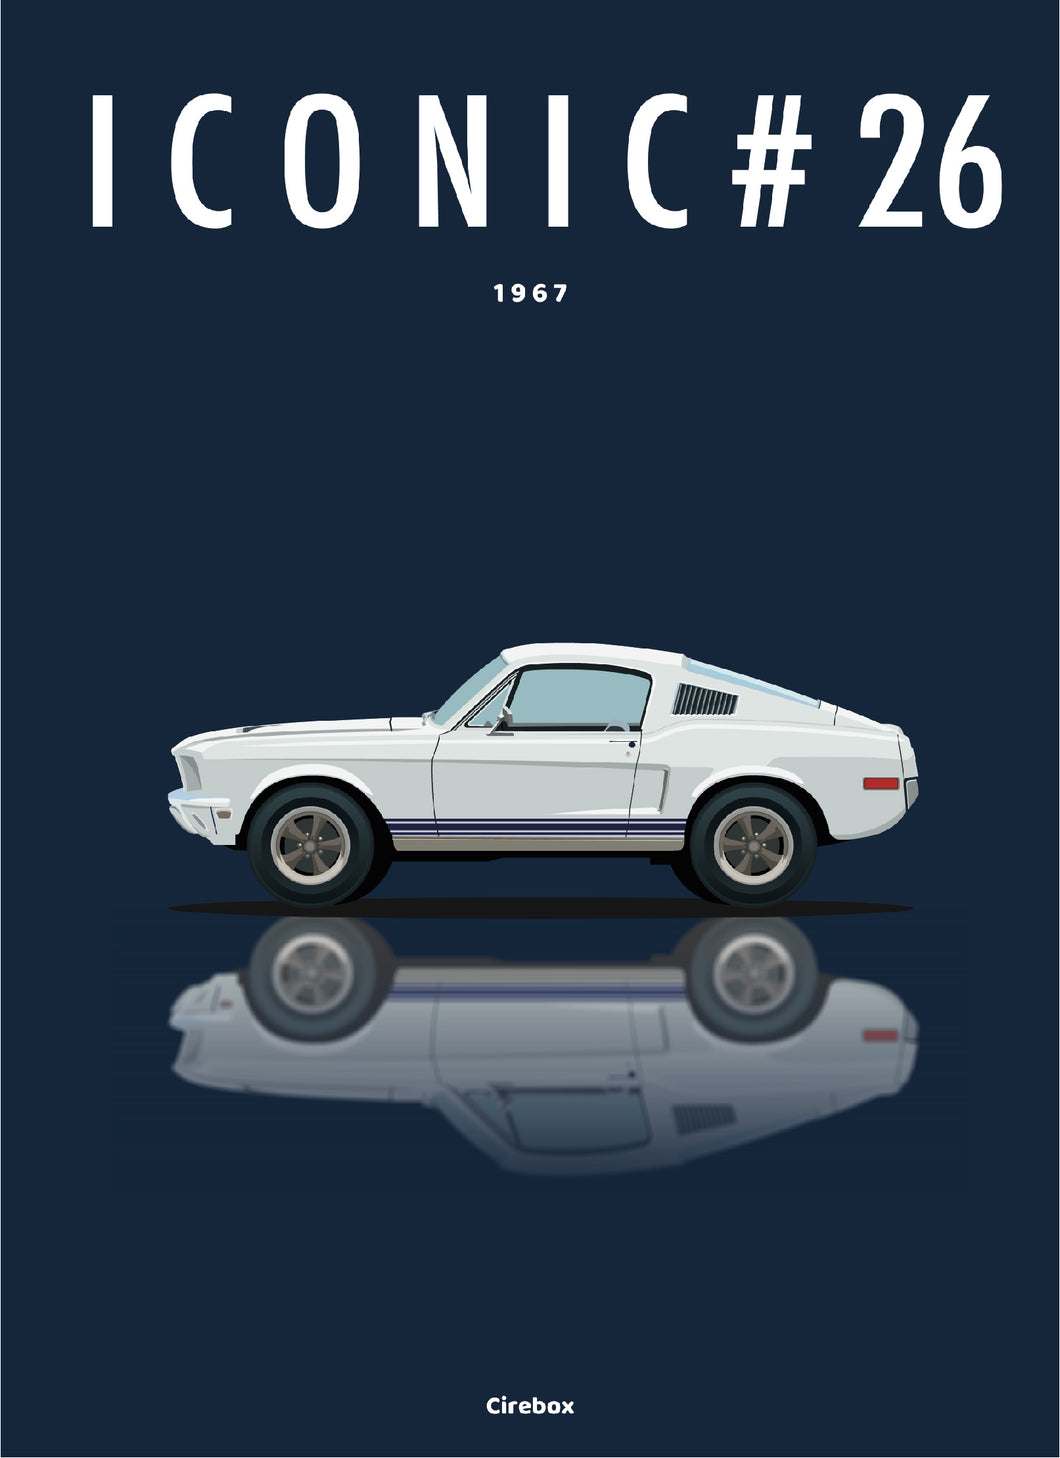 Affiche ICONIC FORD Mustang 67